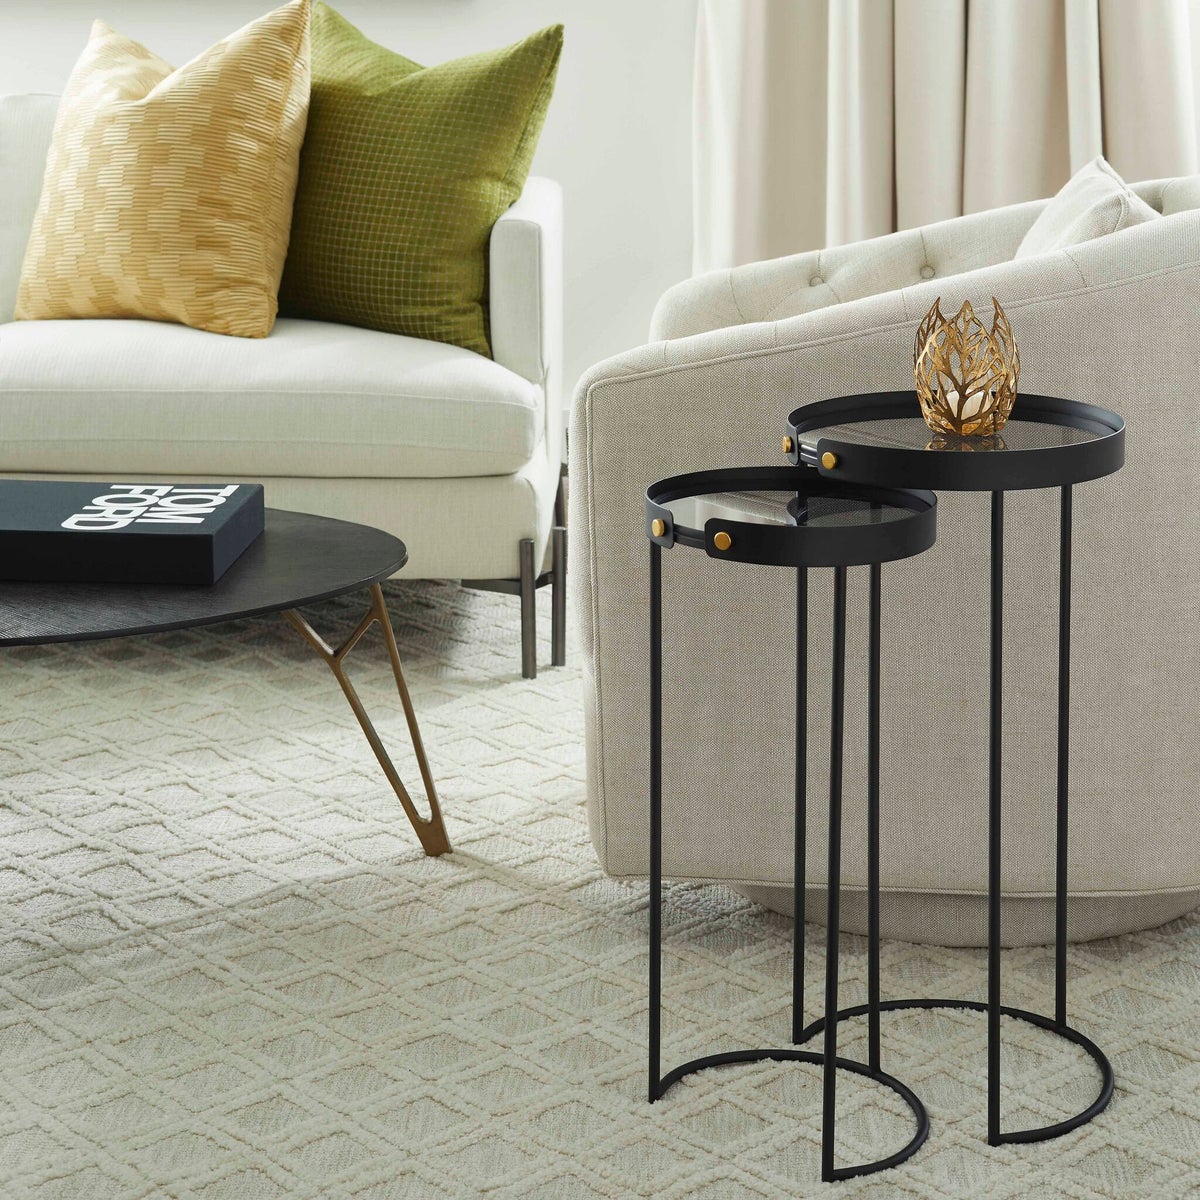 Tall Bow Tie Tables | Graphite